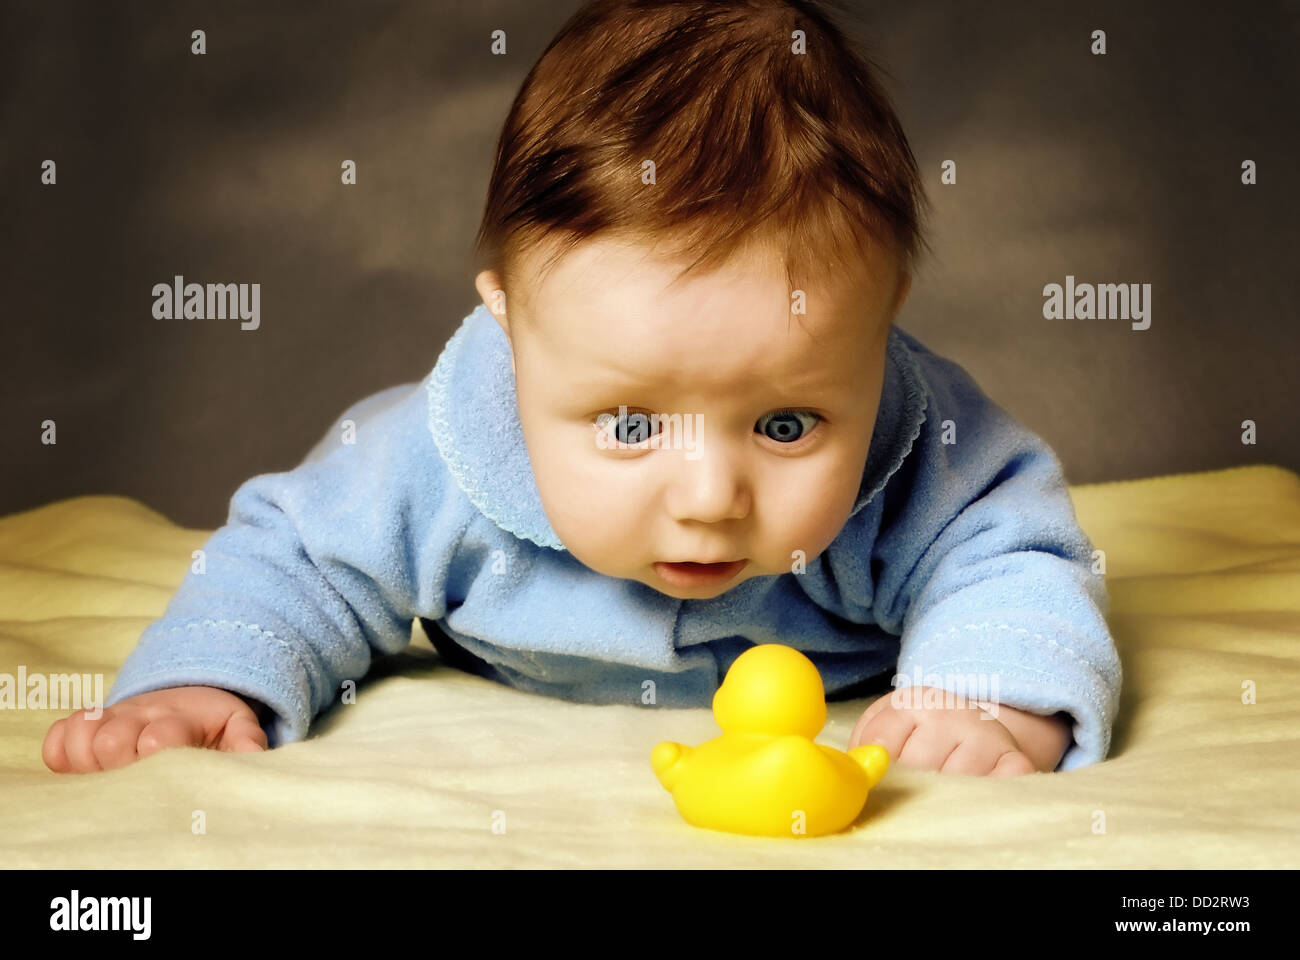 A child with surprise considers a toy duck. Stock Photo